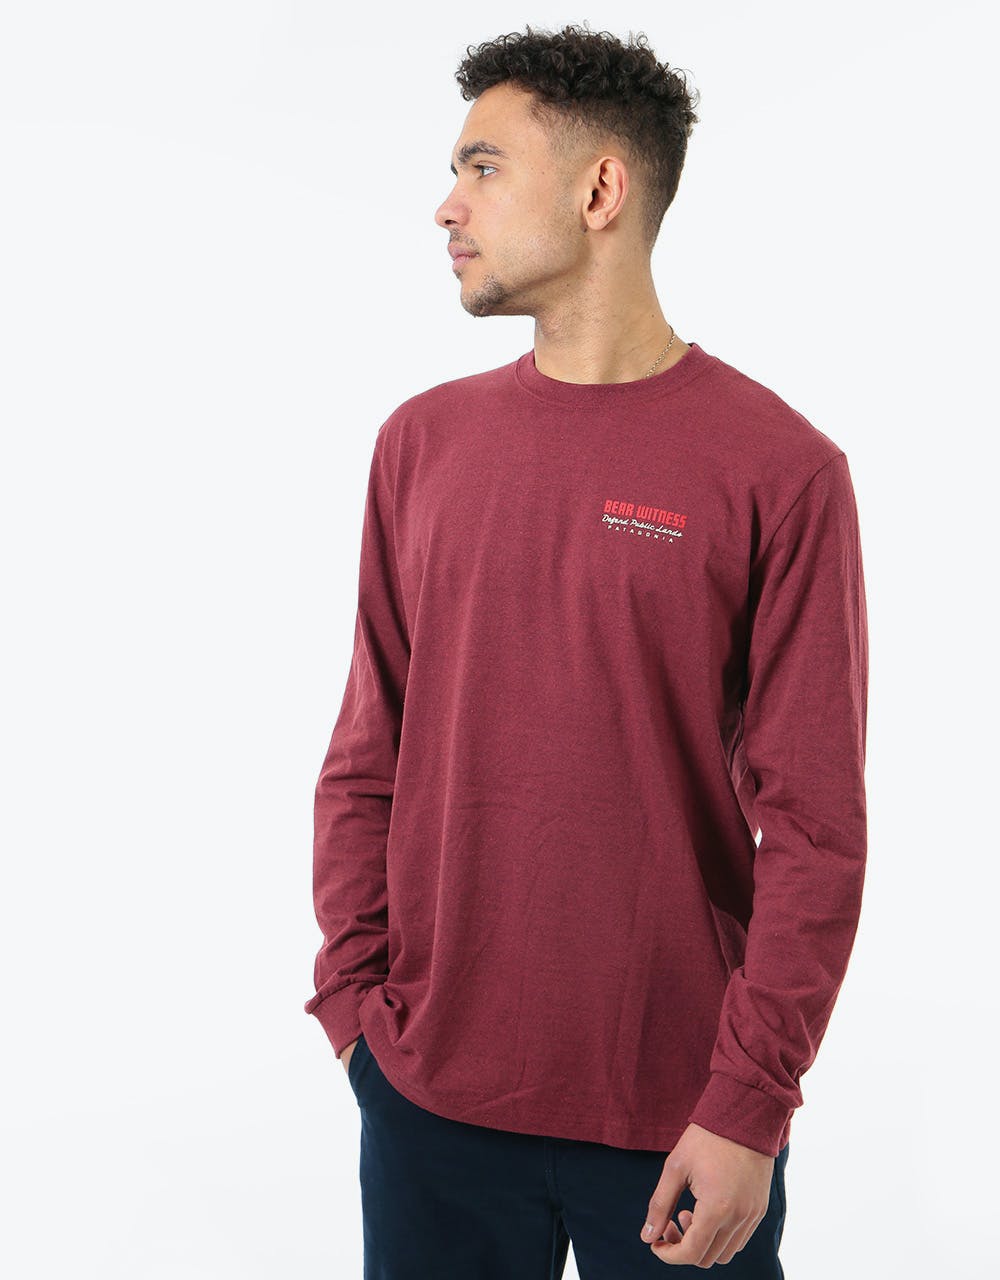 Patagonia L/S See & Believe Responsibili-Tee - Oxide Red